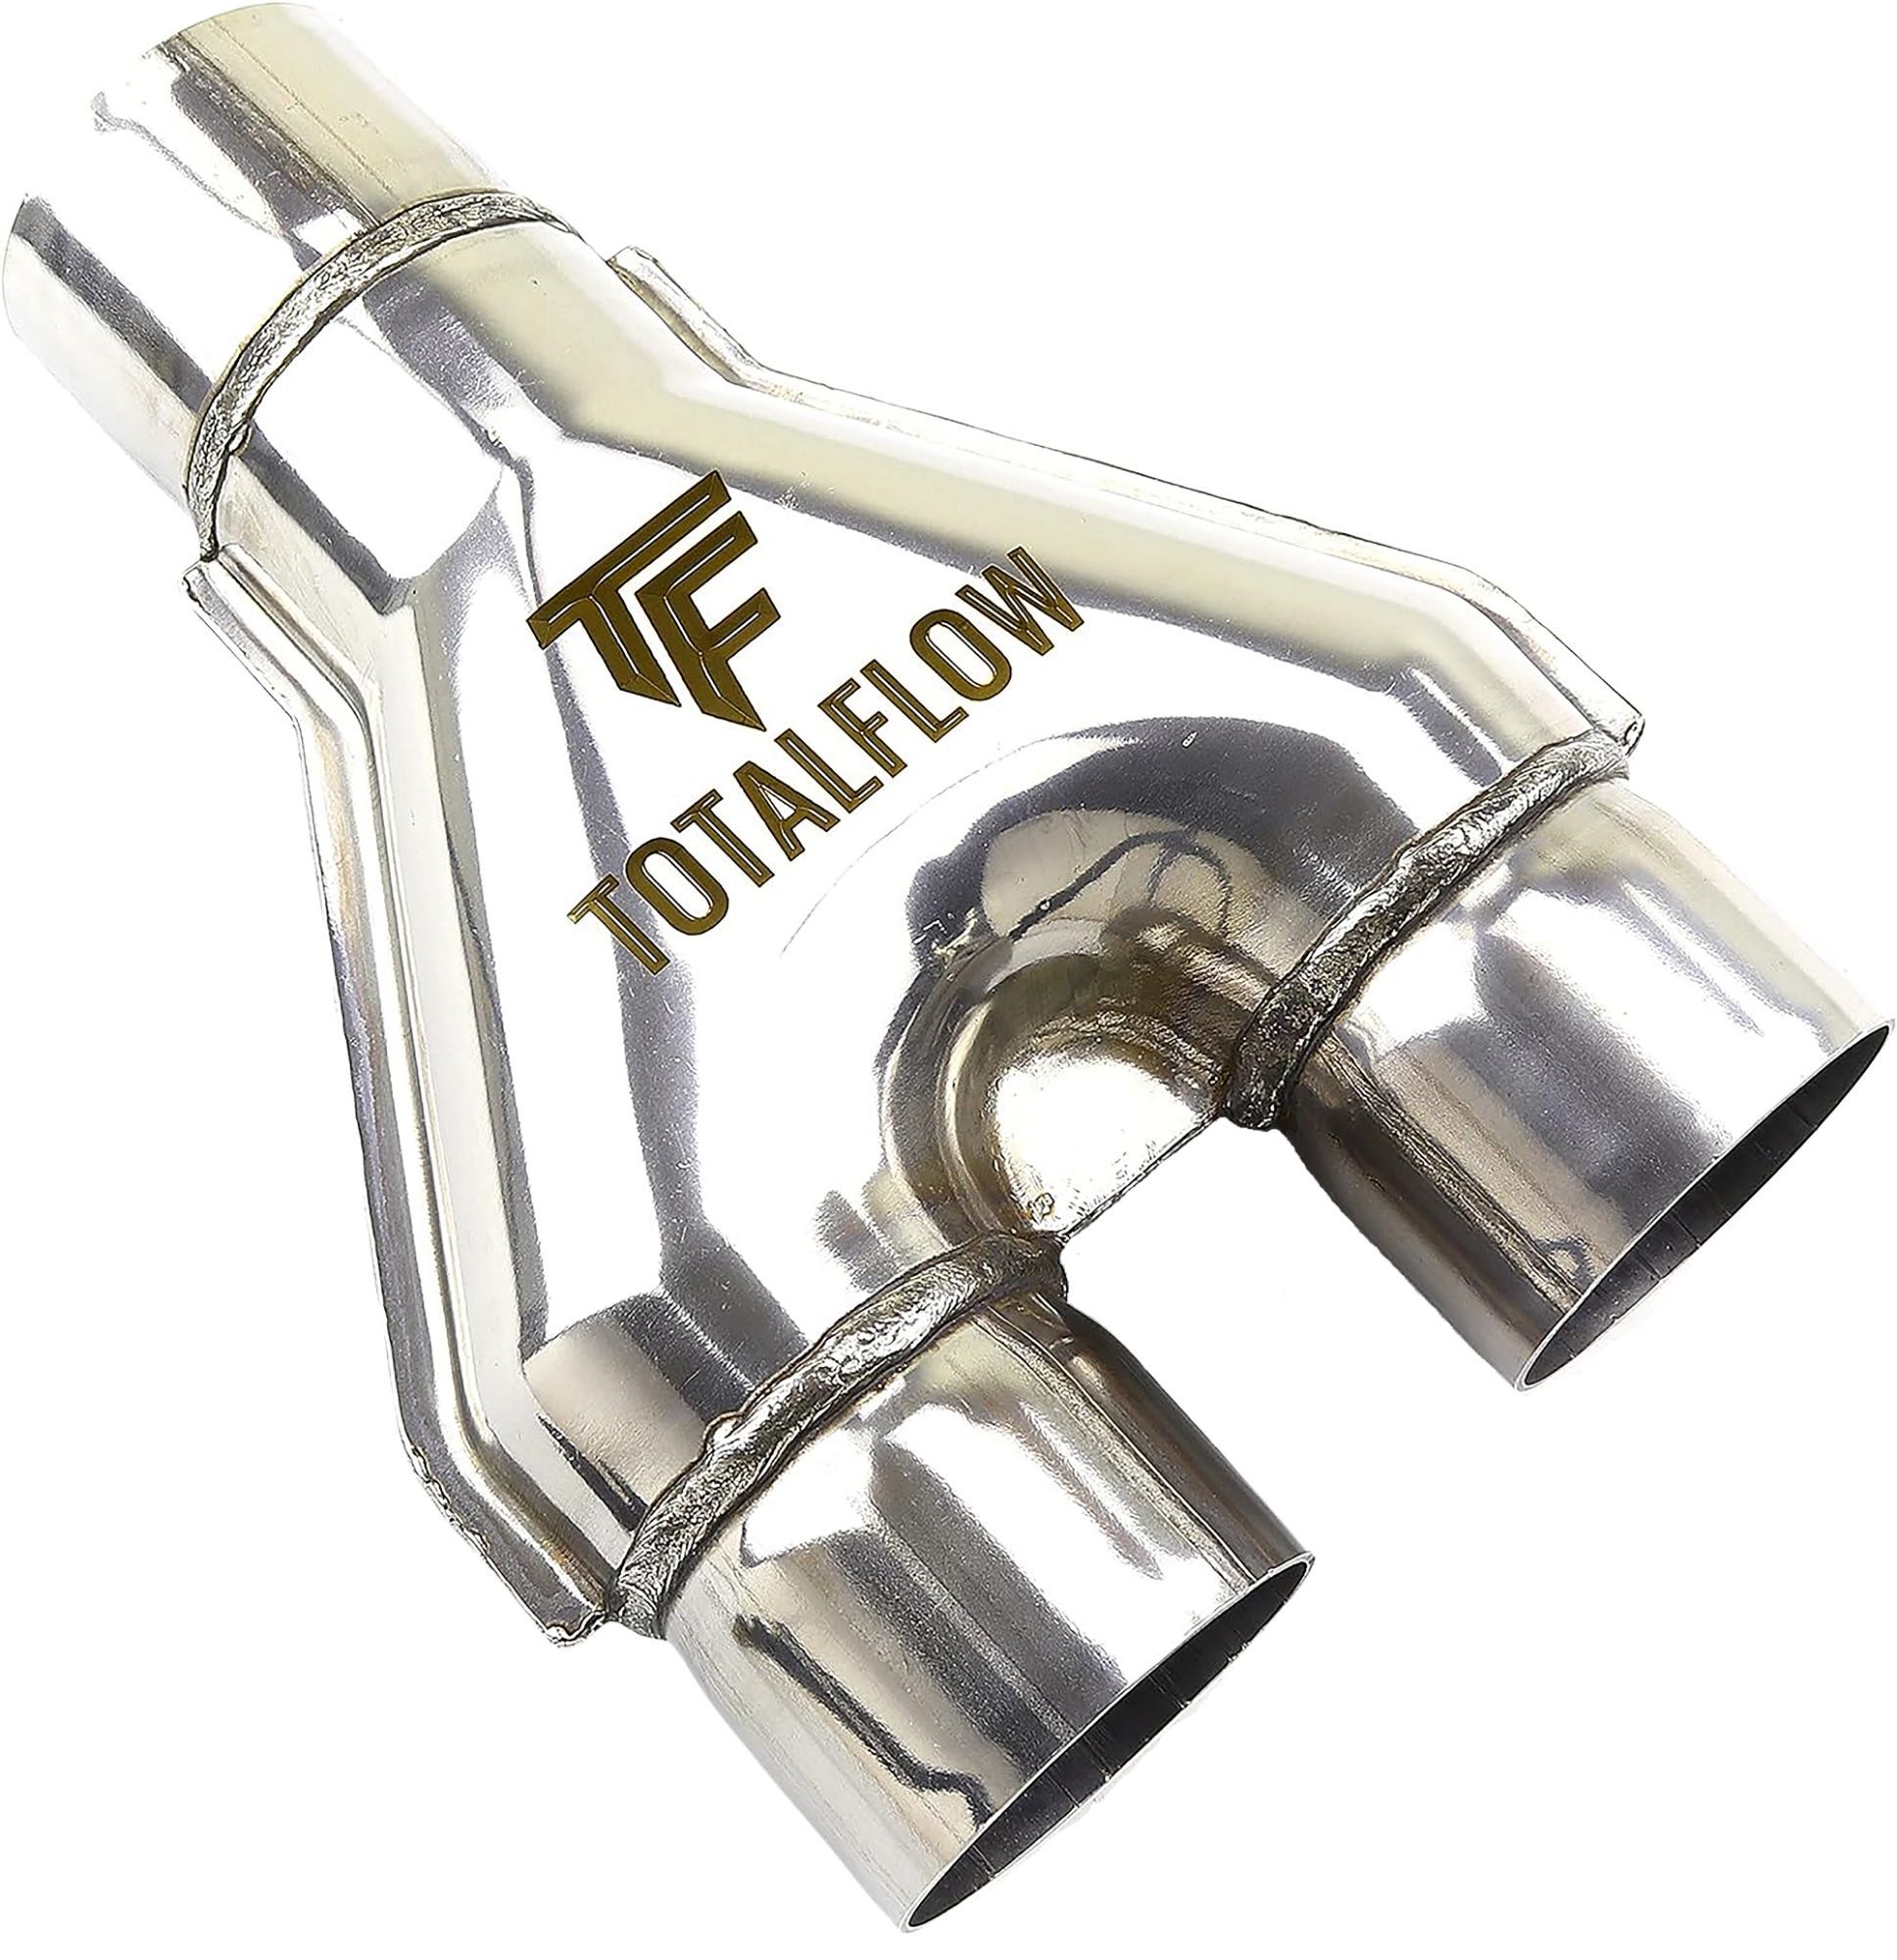 TOTALFLOW TF-SY3024 | Universal Exhaust 3" Inch Single - 2-1/4" Dual Y-Pipe